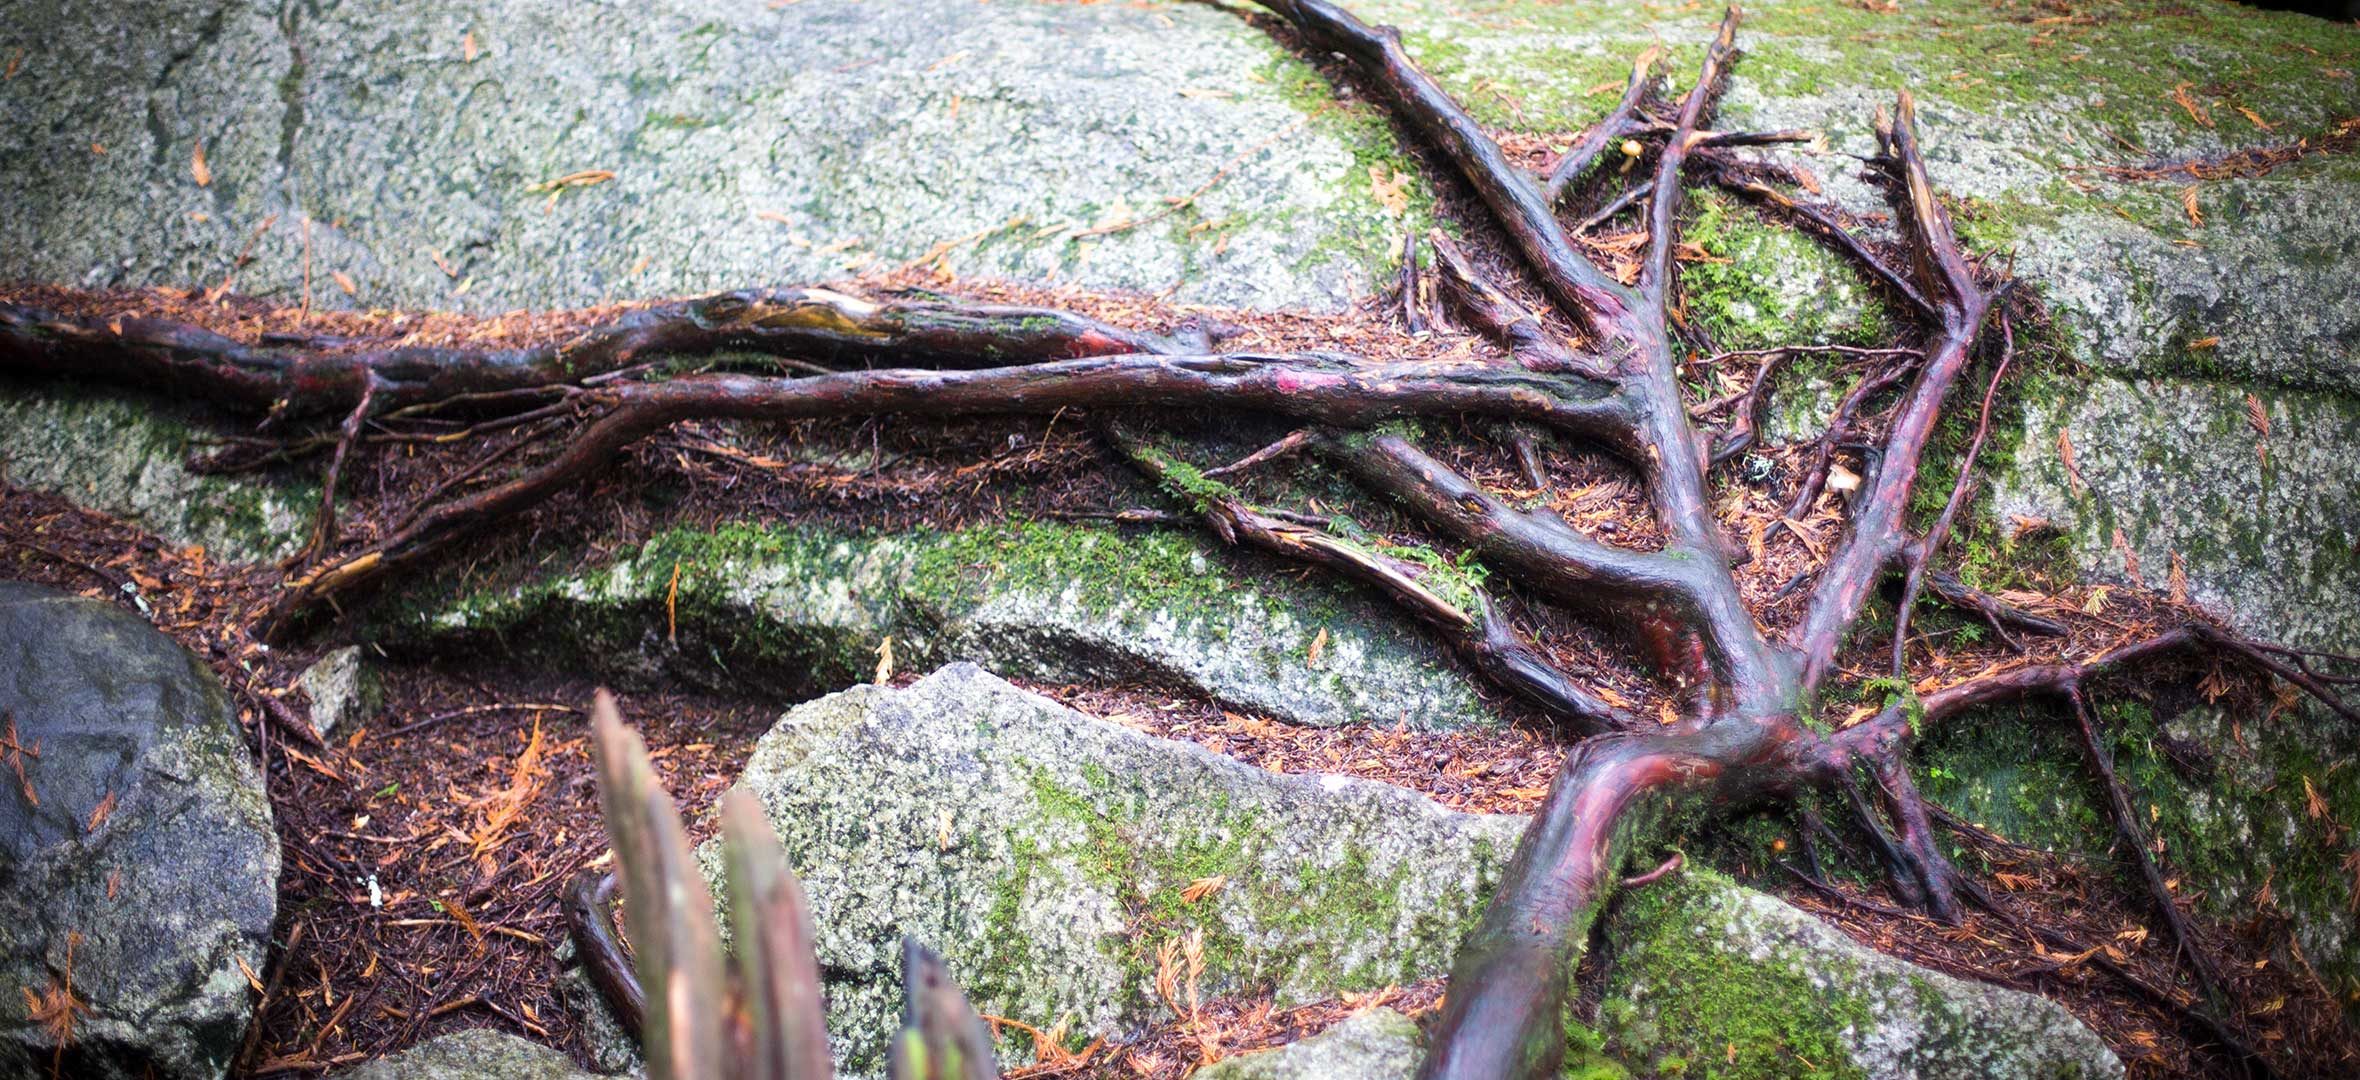 Roots growing over a boulder at Stawamus Chief, Squamish, B.C.